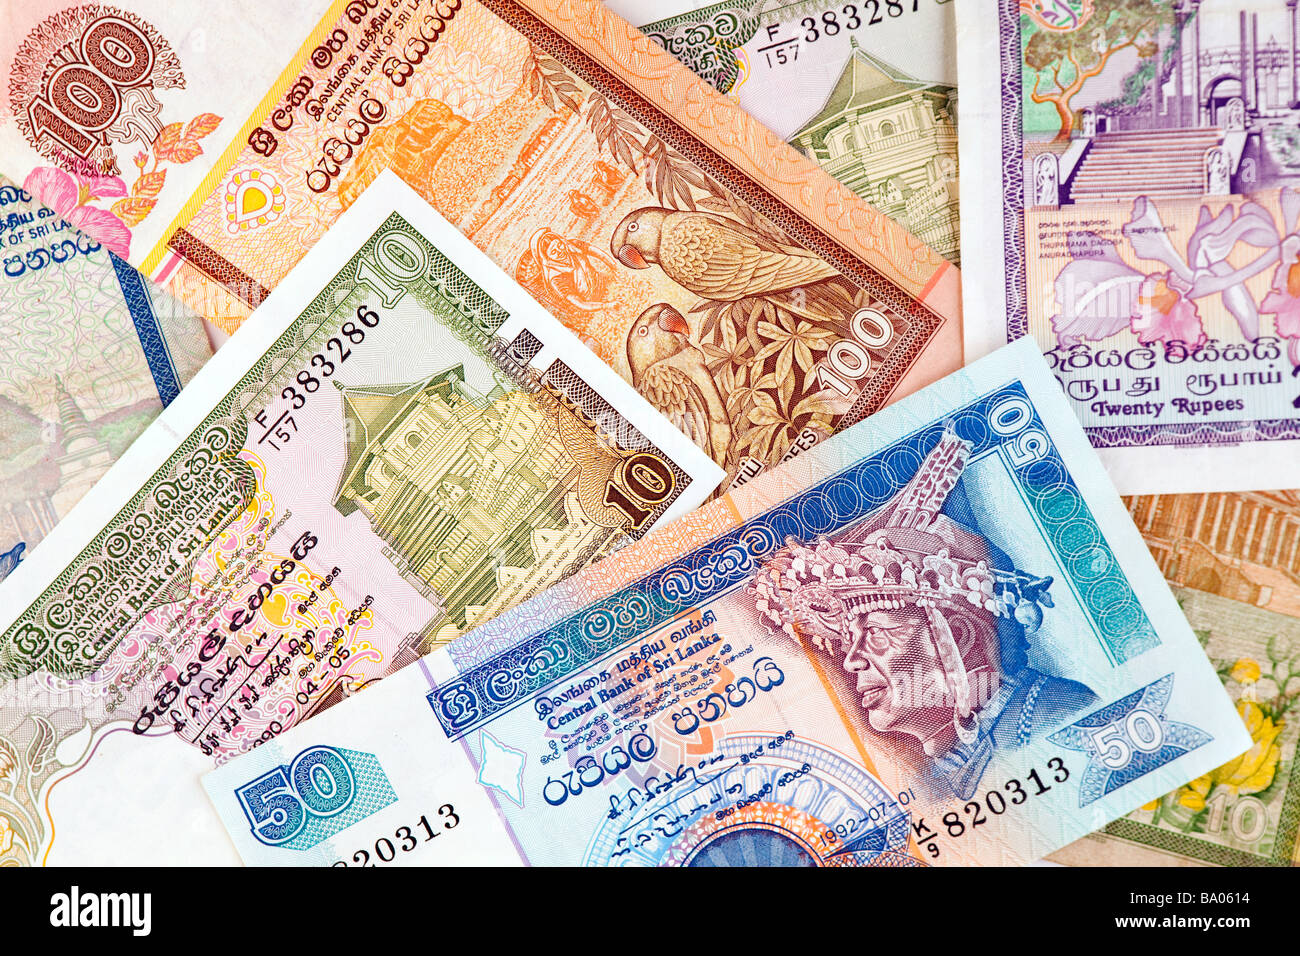 Money currency detail of Sri Lankan banknotes Stock Photo